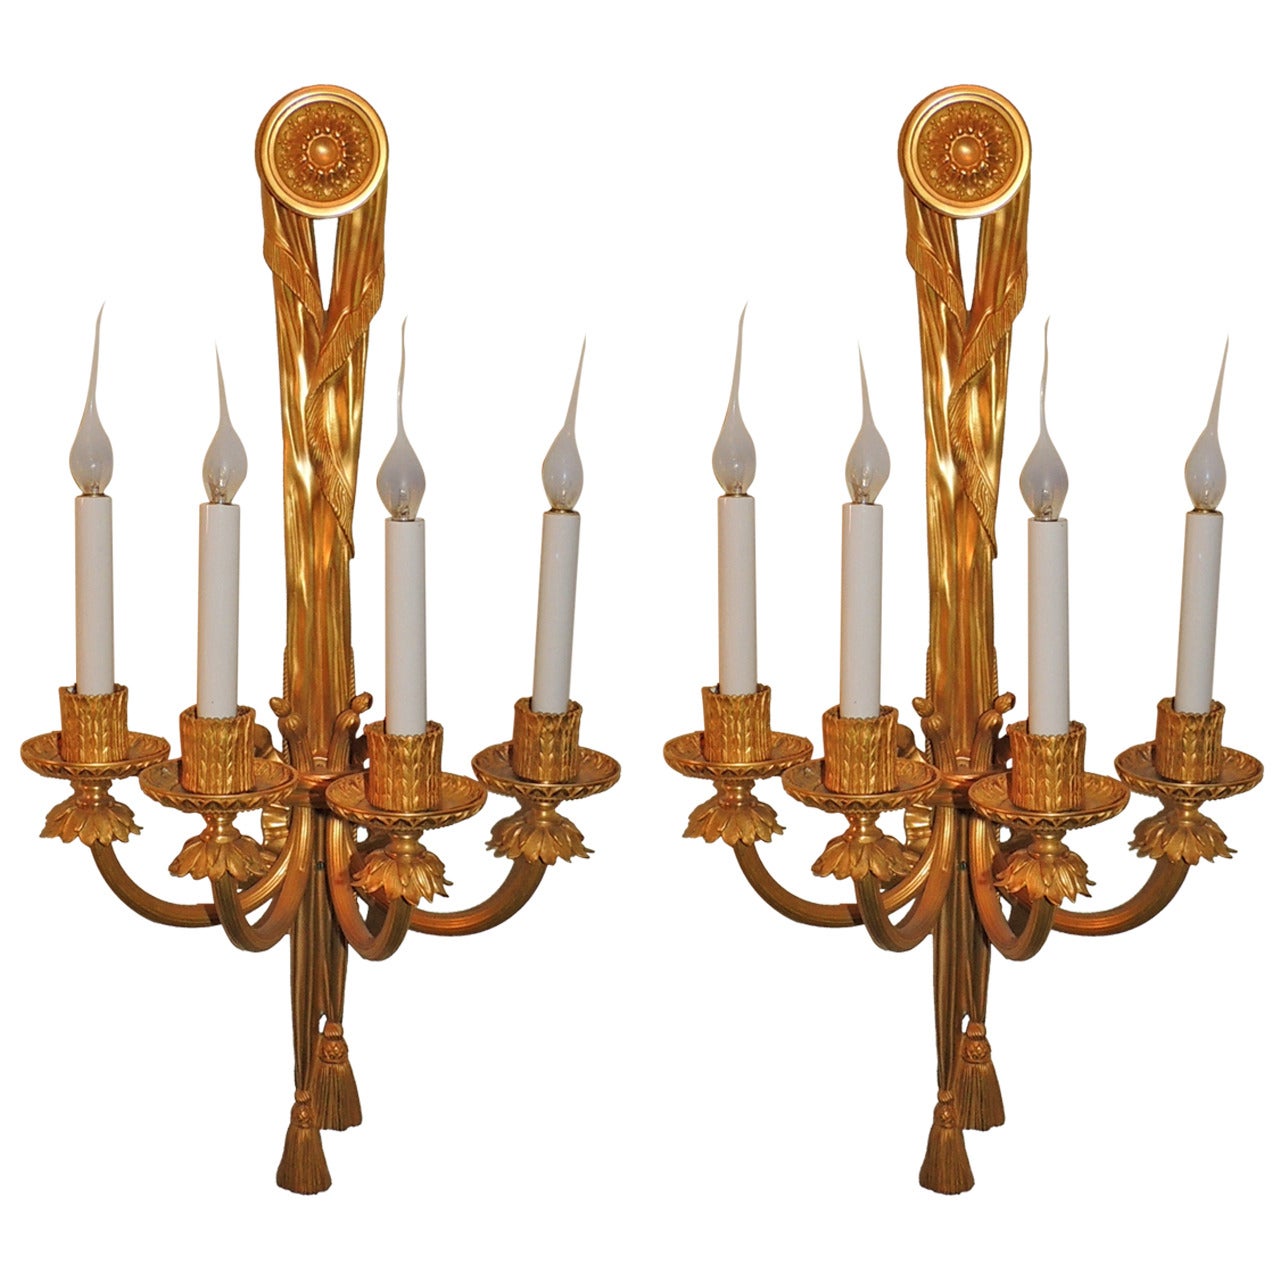 Outstanding Pair of Doré Bronze Caldwell Four-Arm Ribbon, Bow and Tassel Sconces